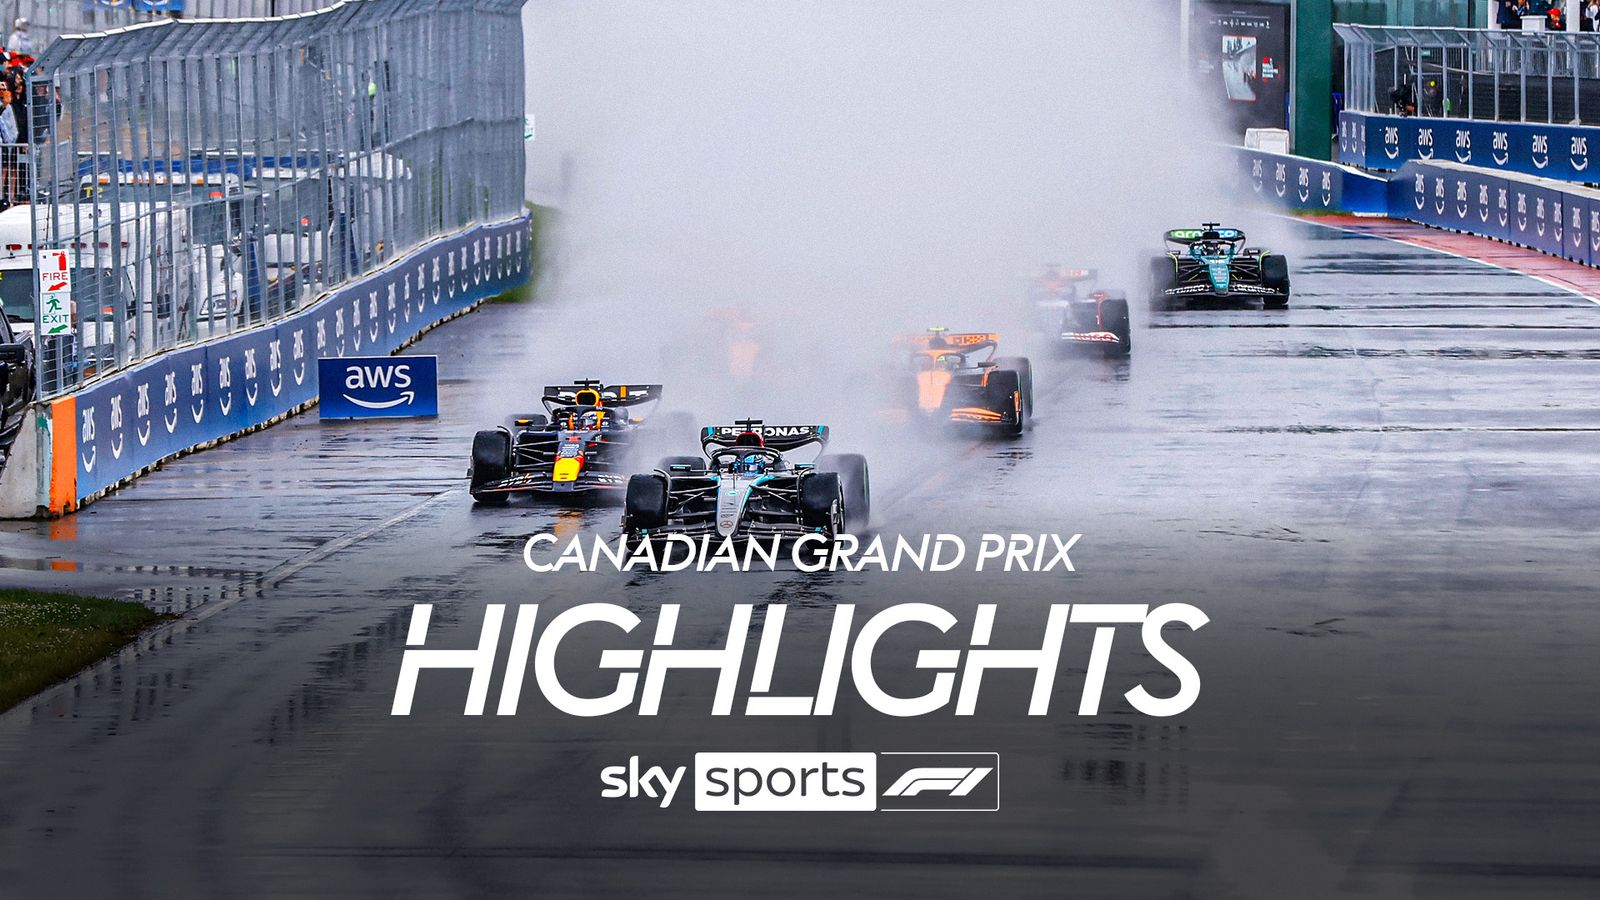 Max Verstappen Wins Canadian Grand Prix for 3rd Consecutive Year, Outpaces George Russell by Over 15 Seconds